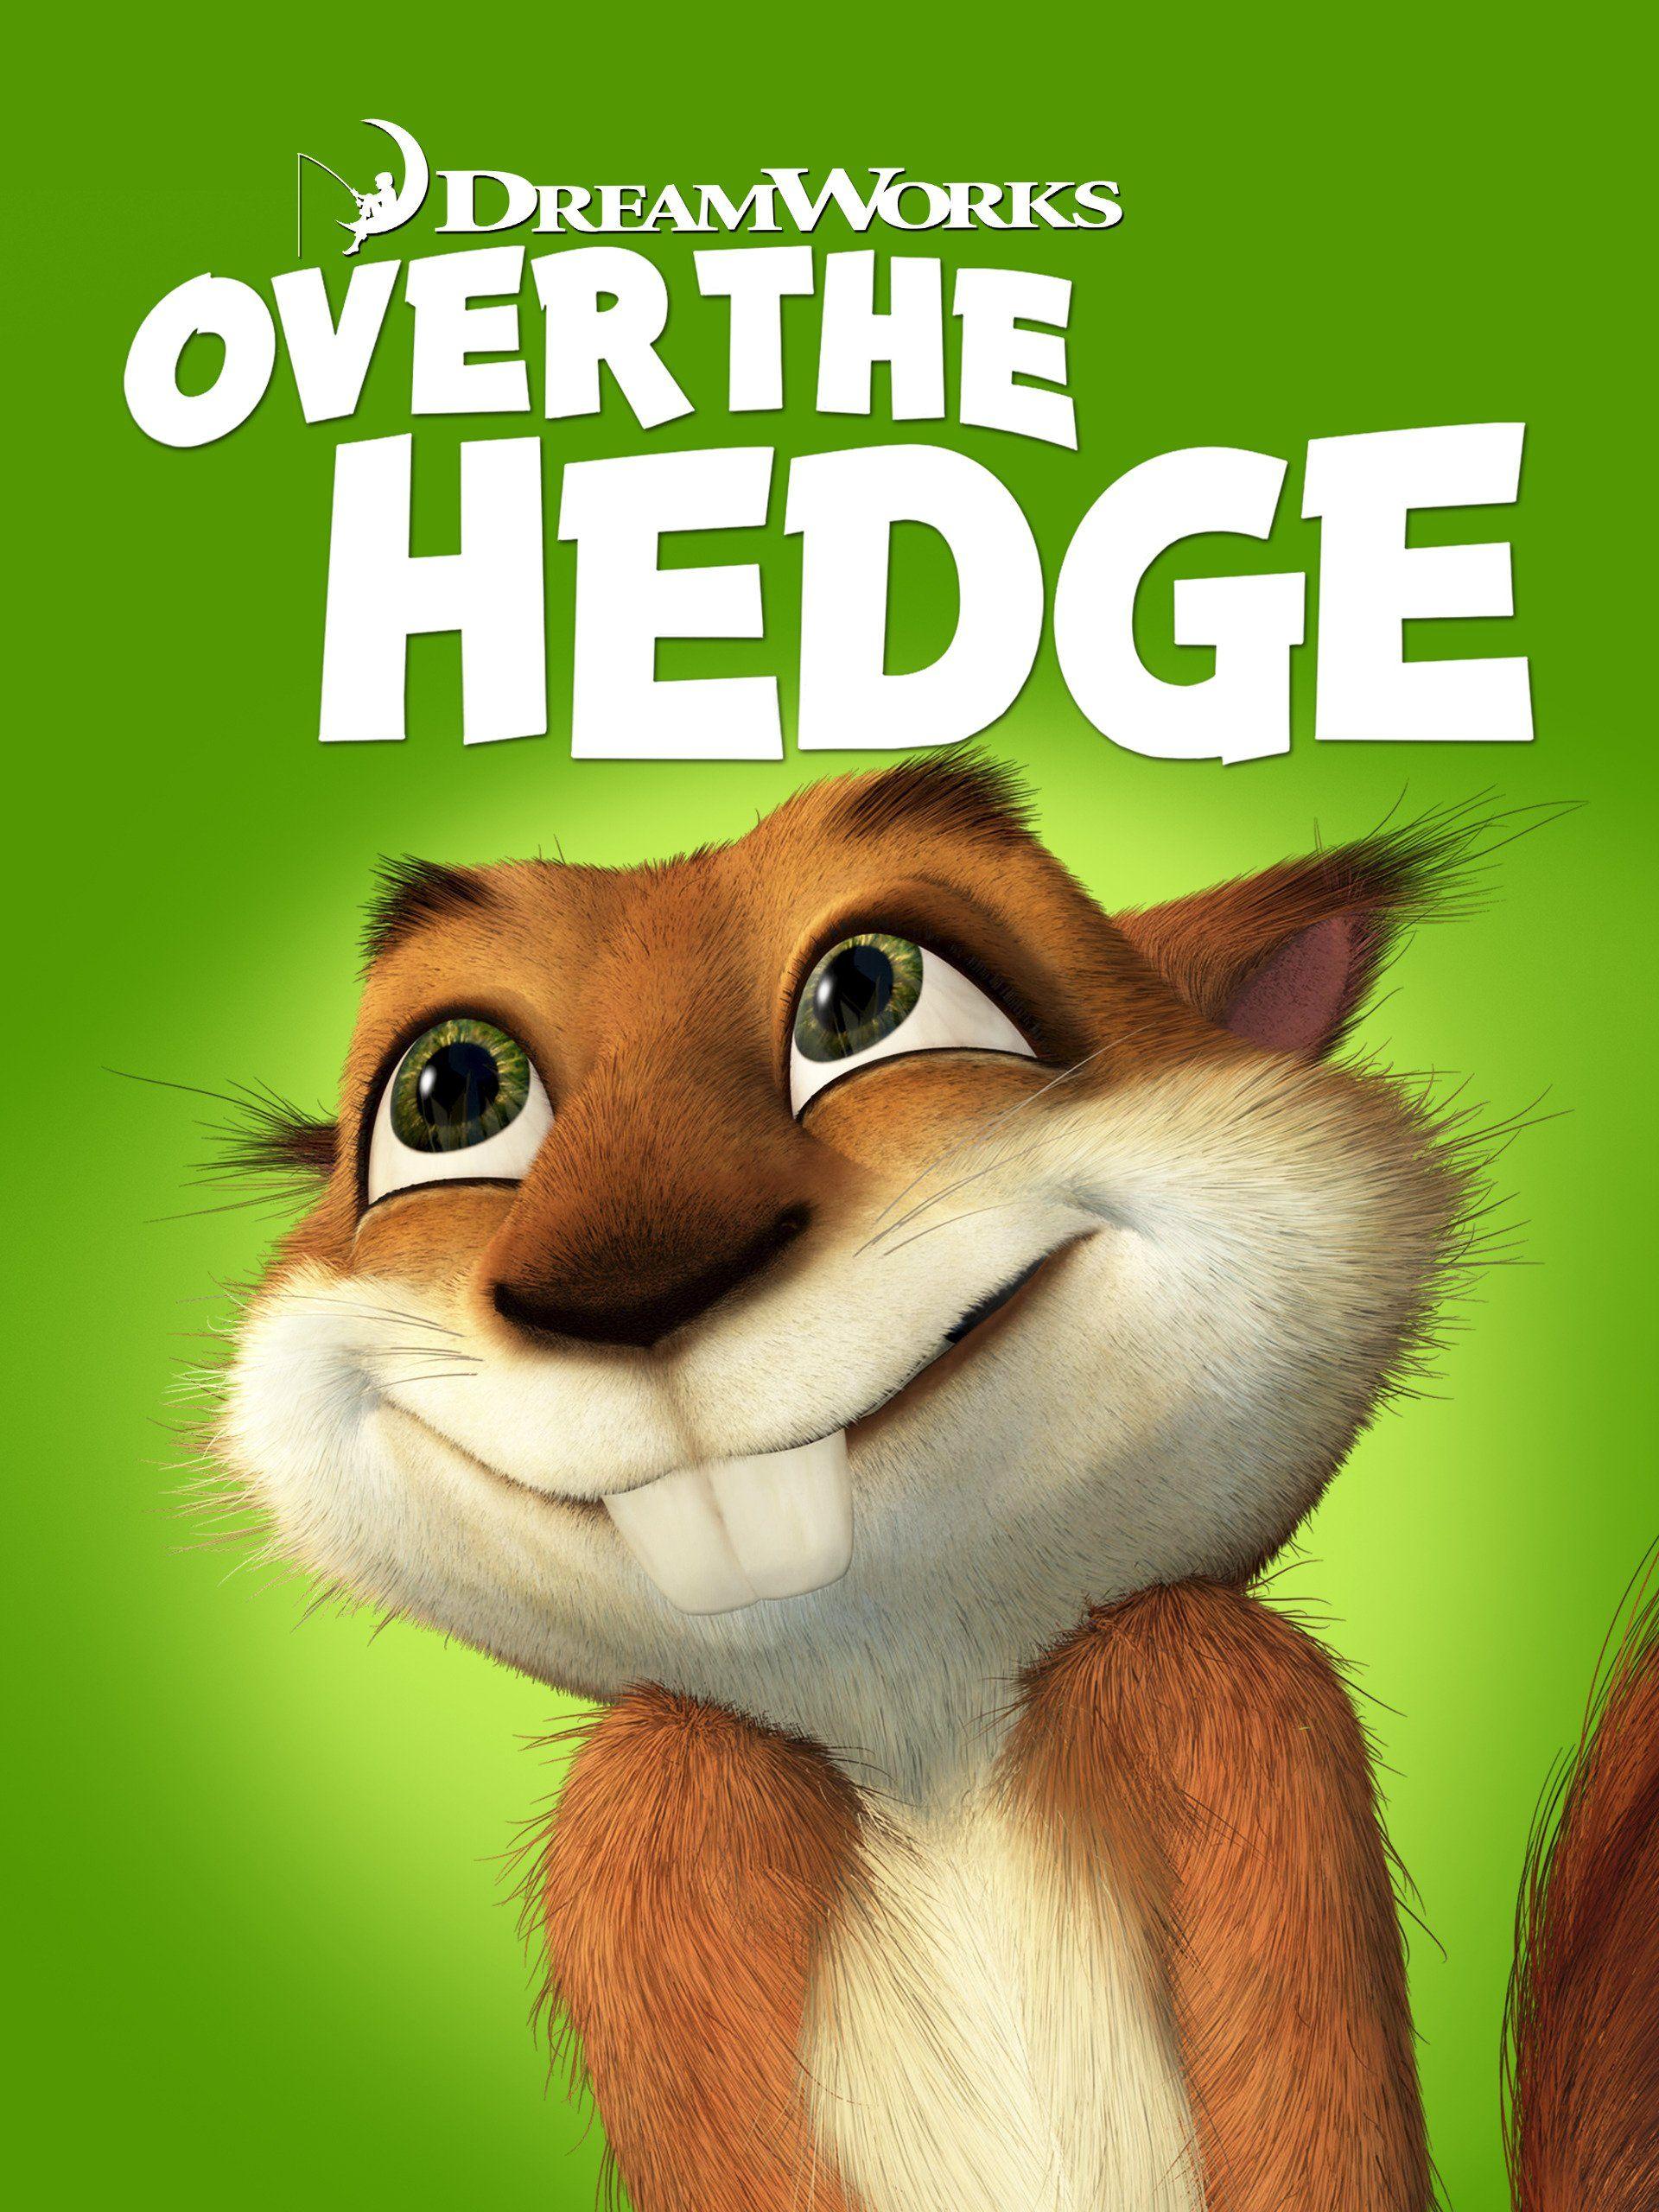 Over the Hedge Logo - Amazon.com: Watch Over the Hedge | Prime Video